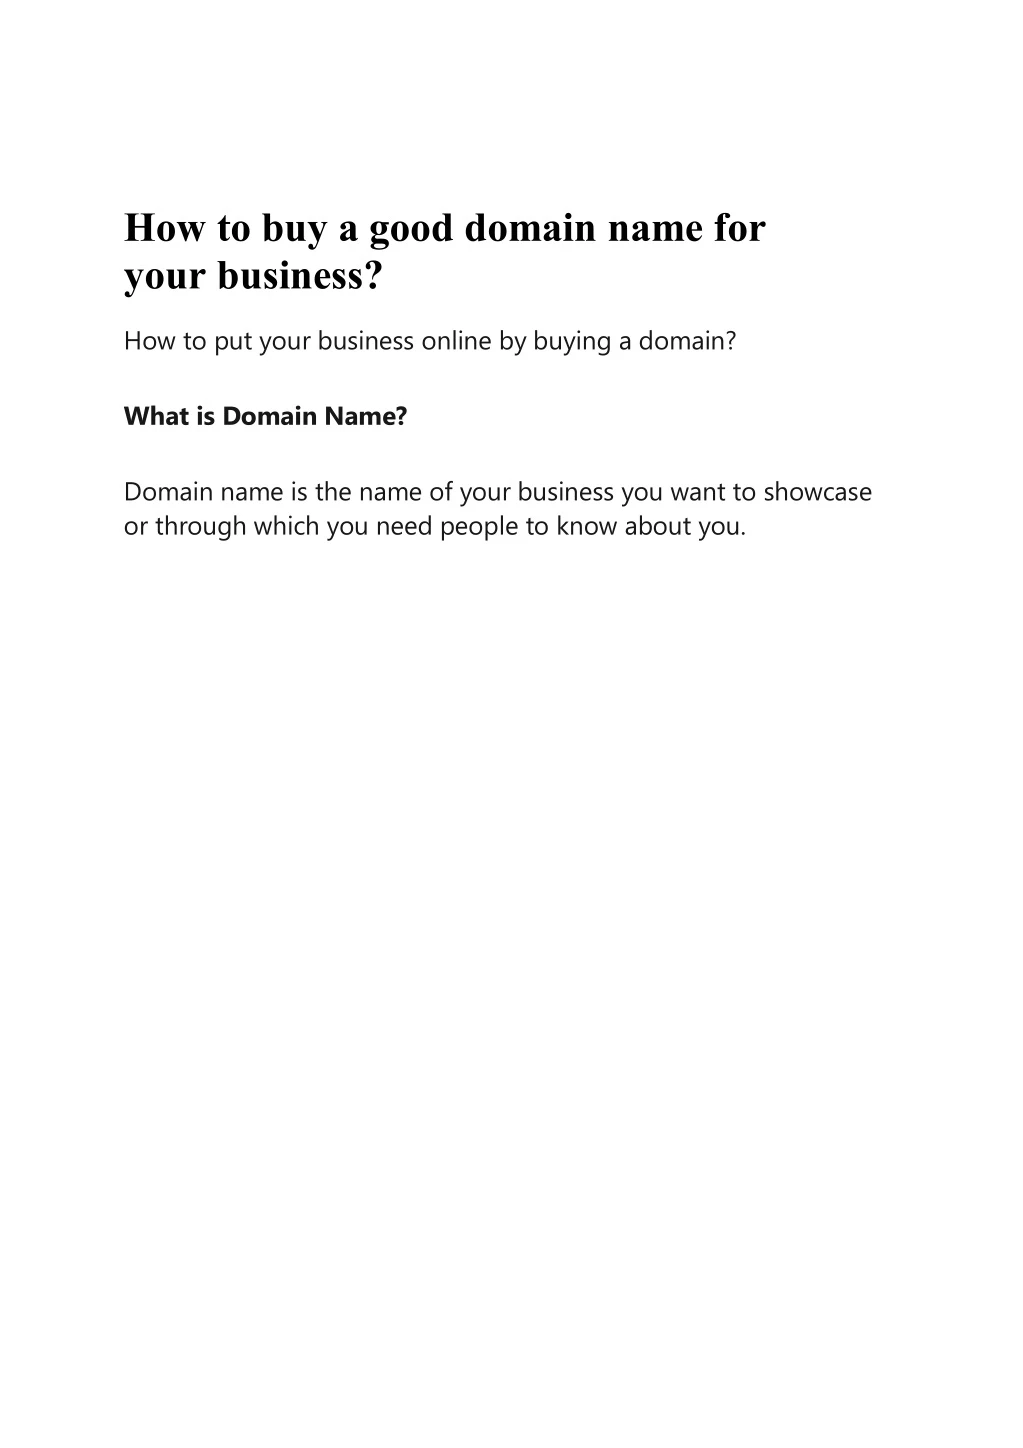 how to buy a good domain name for your business